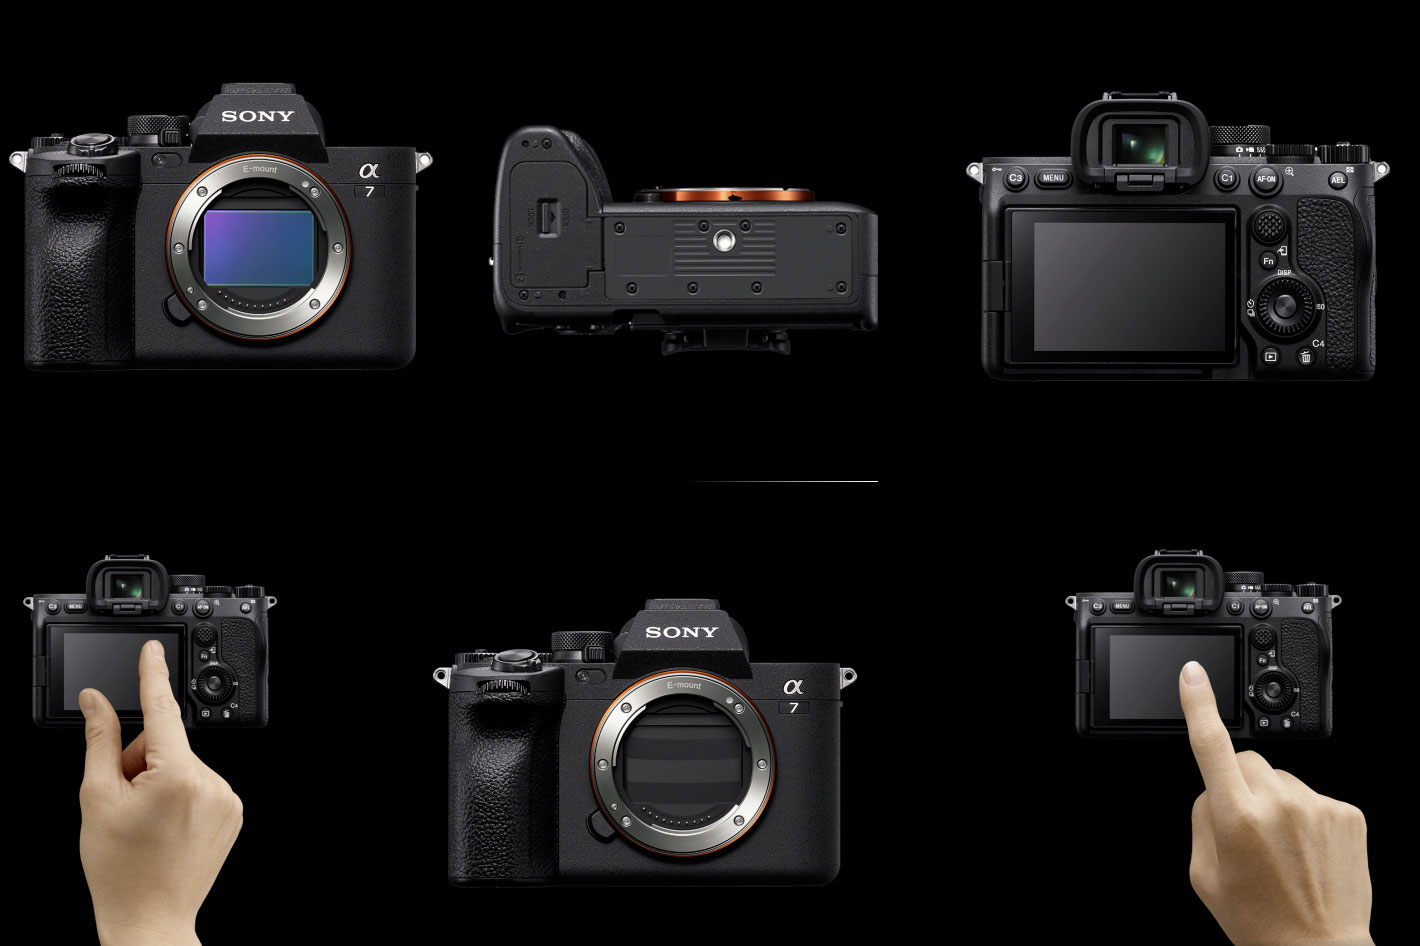 New Sony Alpha 7 IV mirrorless takes “basic” to the next level